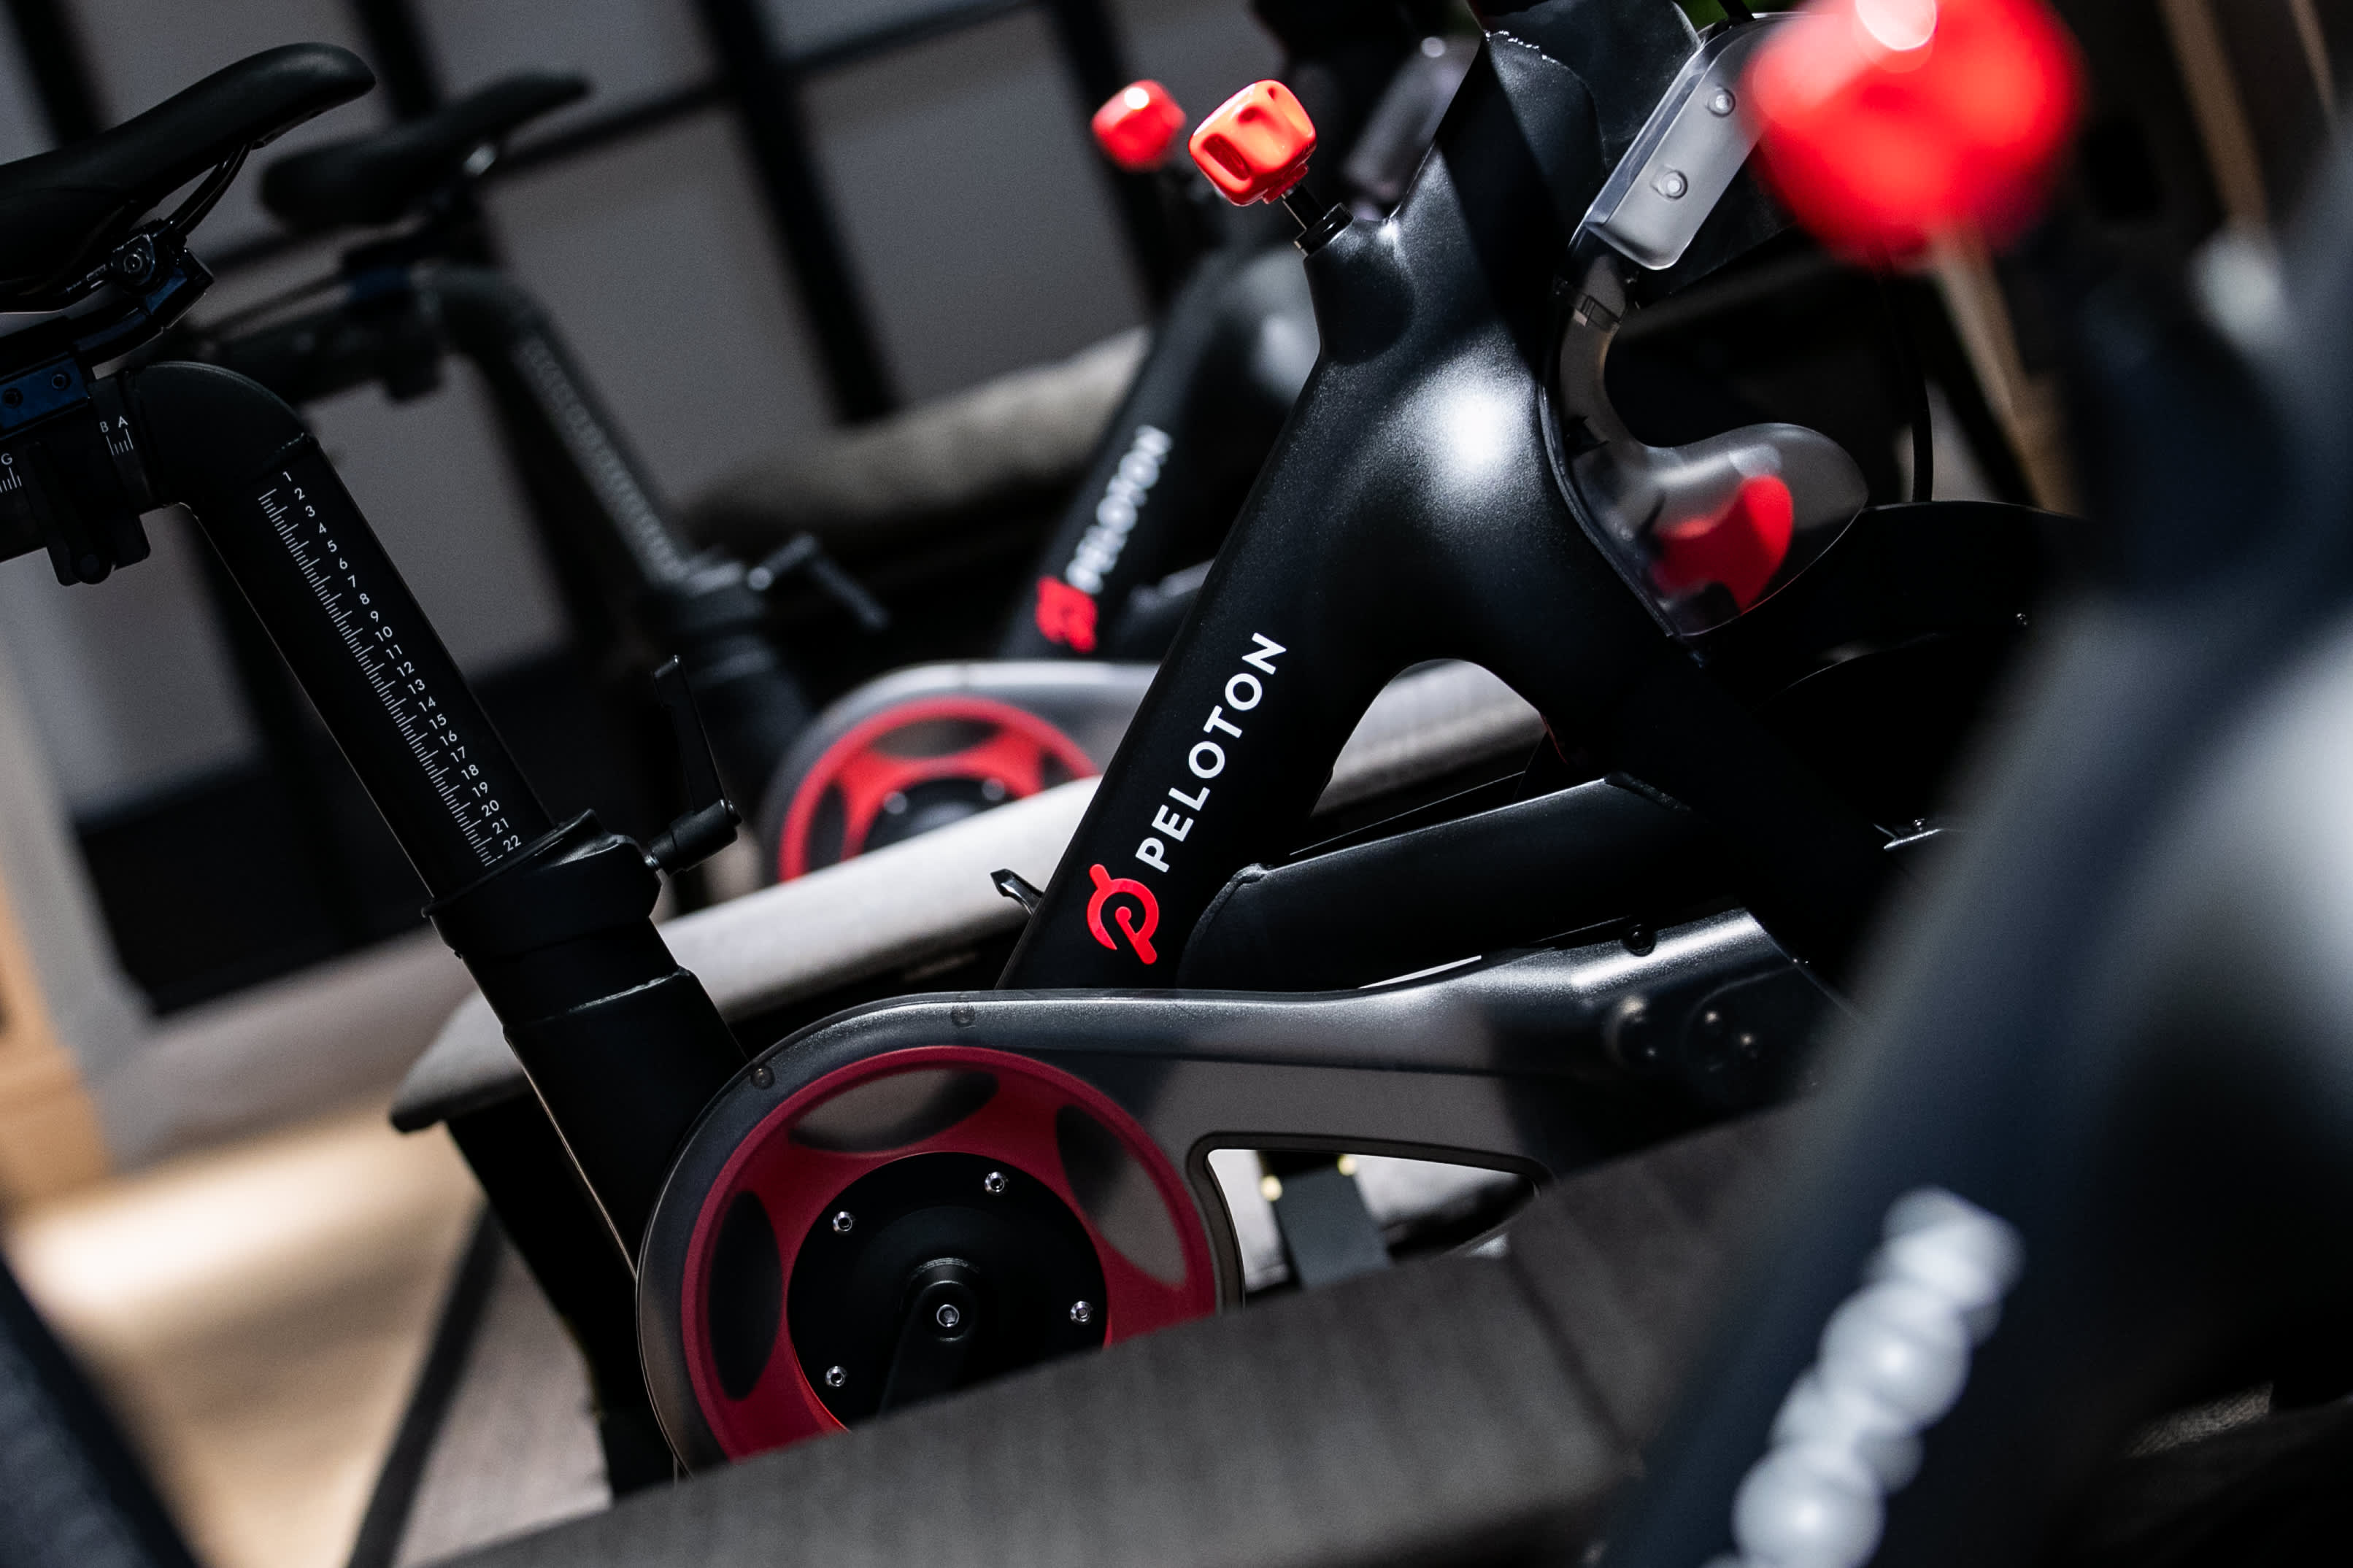 The peloton is about to take on hundreds of dollars in taxes on its bike and treadmill, citing inflation